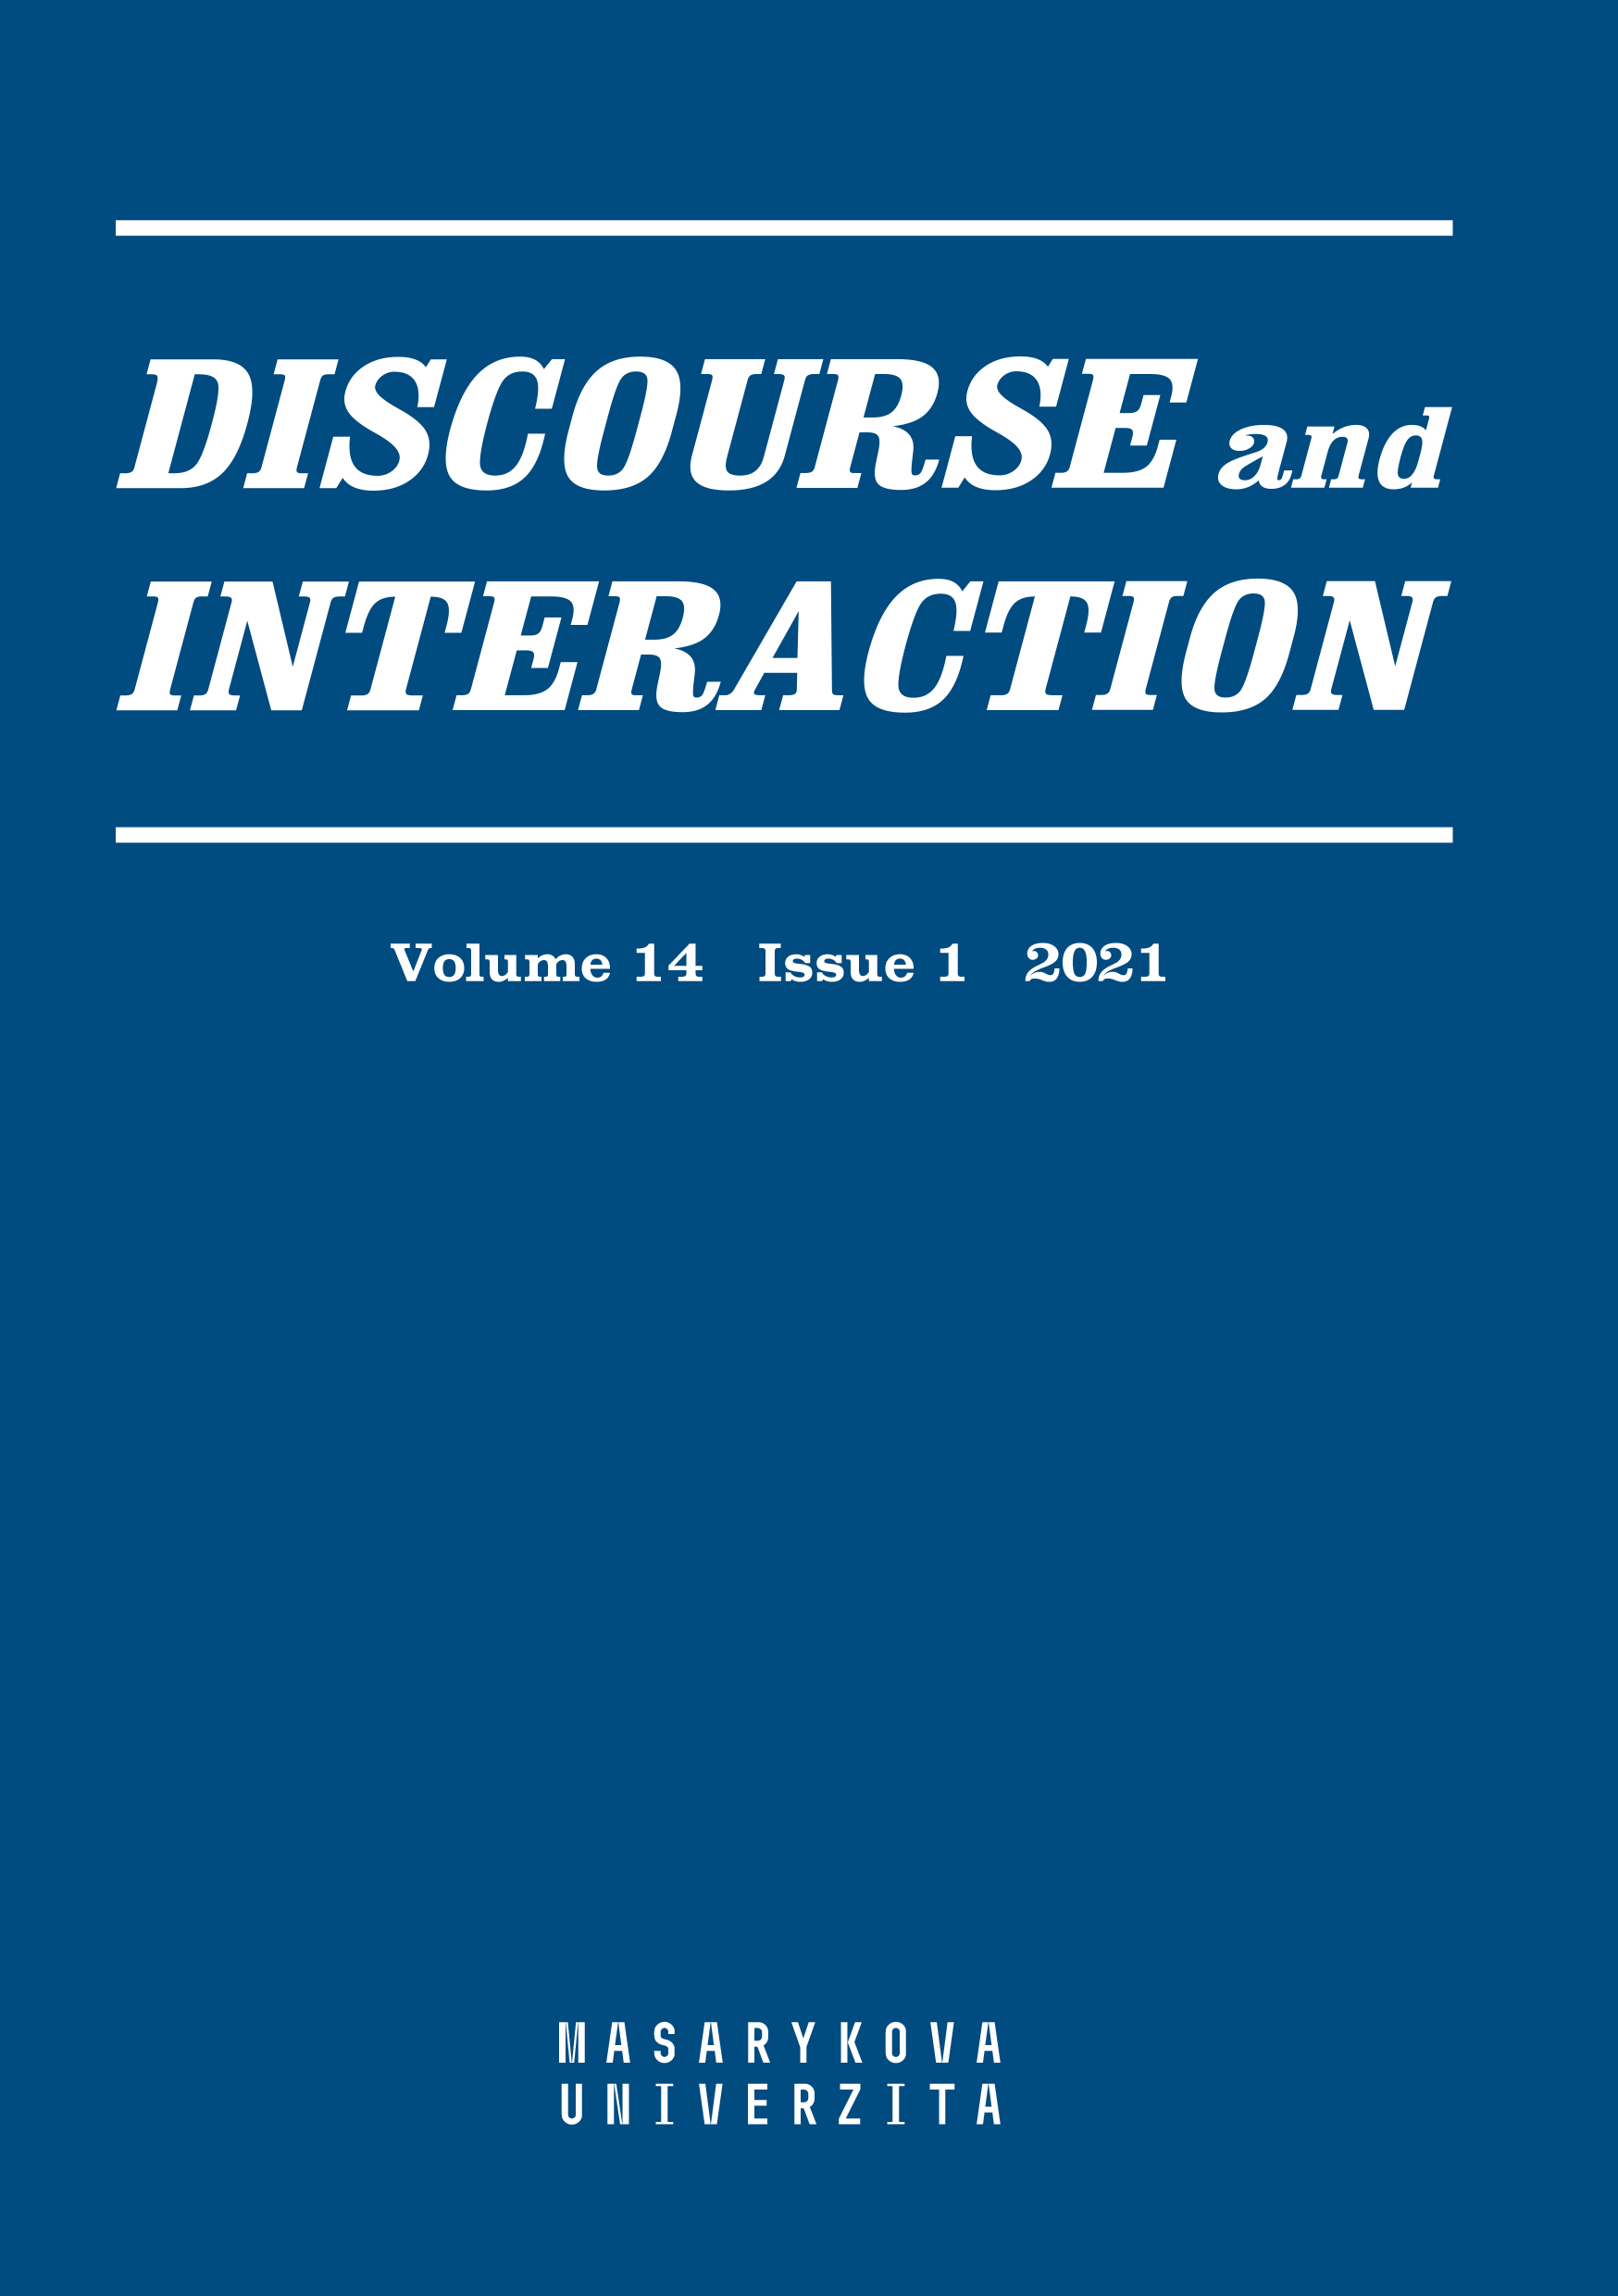 Interpersonality in research article abstracts: A diachronic case study